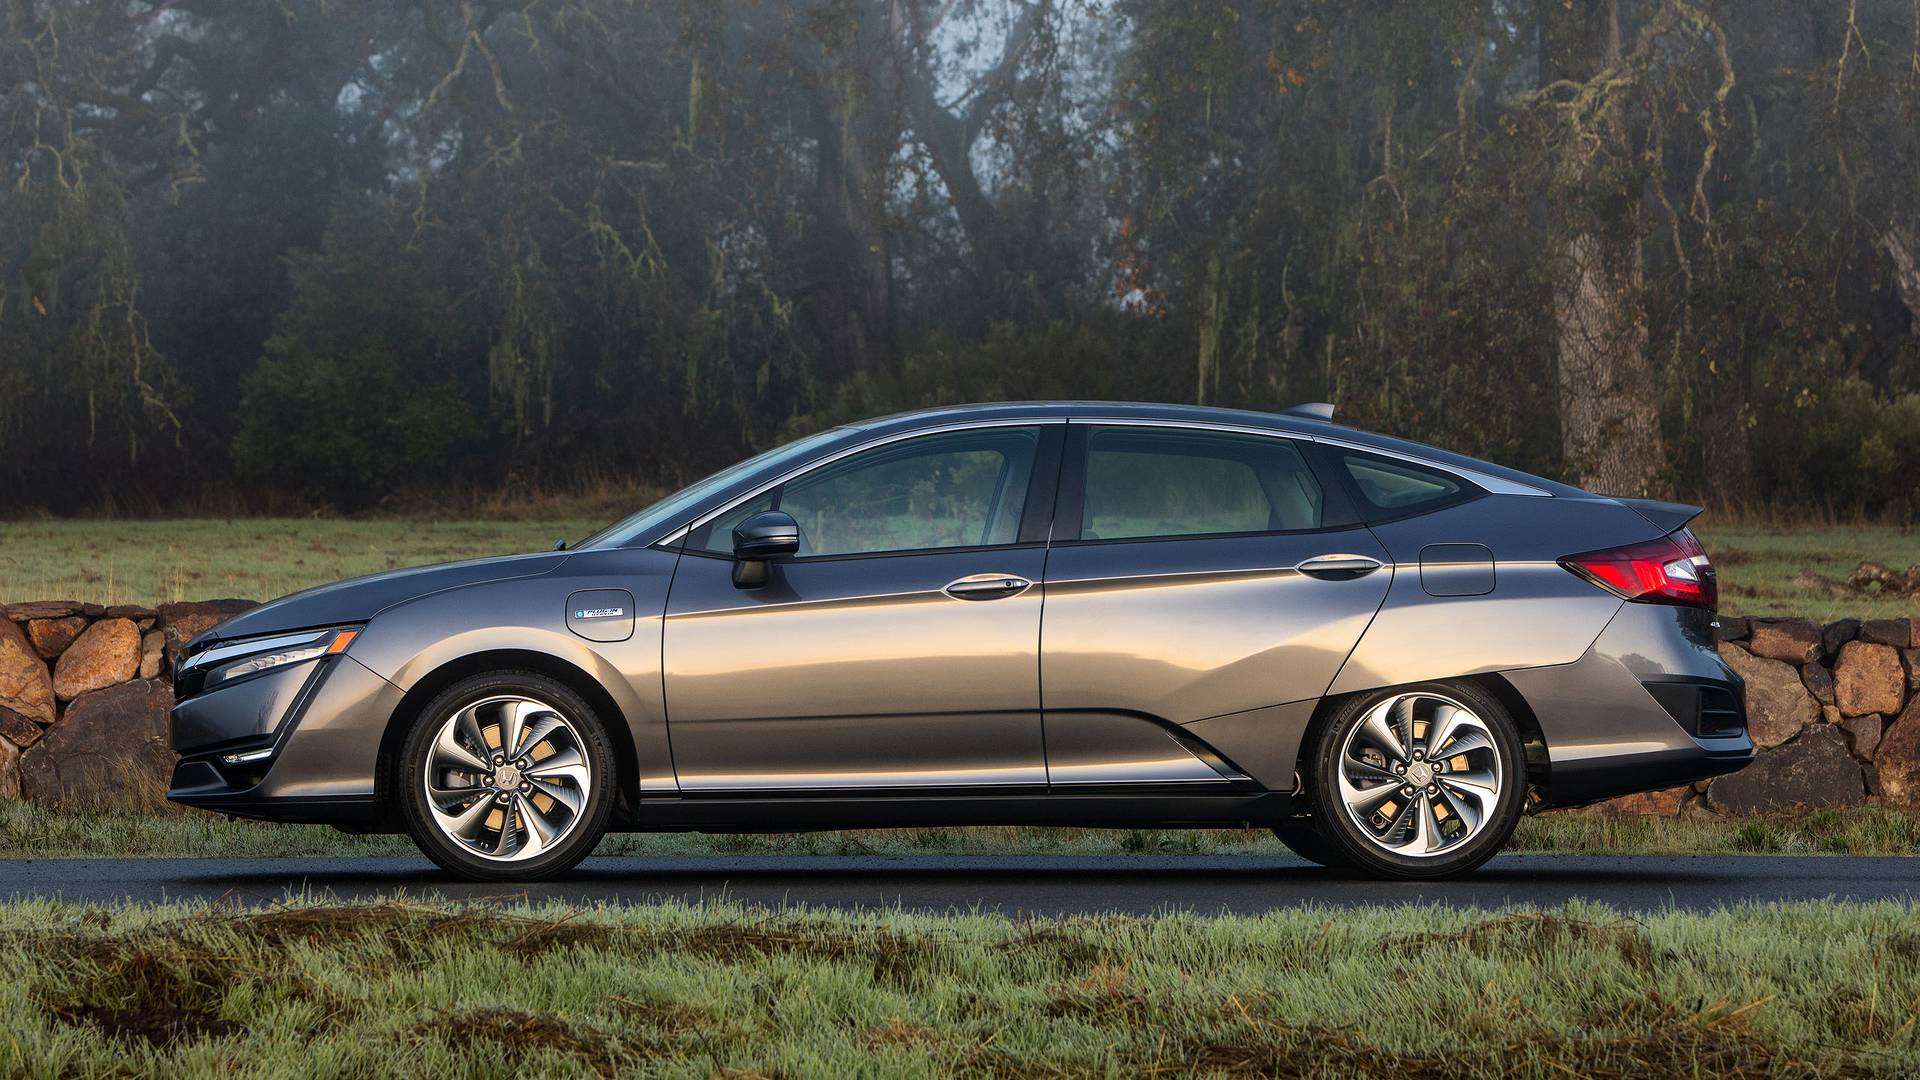 REVIEW: Honda Clarity plug-in hybrid, "A plug-in without the compromise" -  Fuels Fix